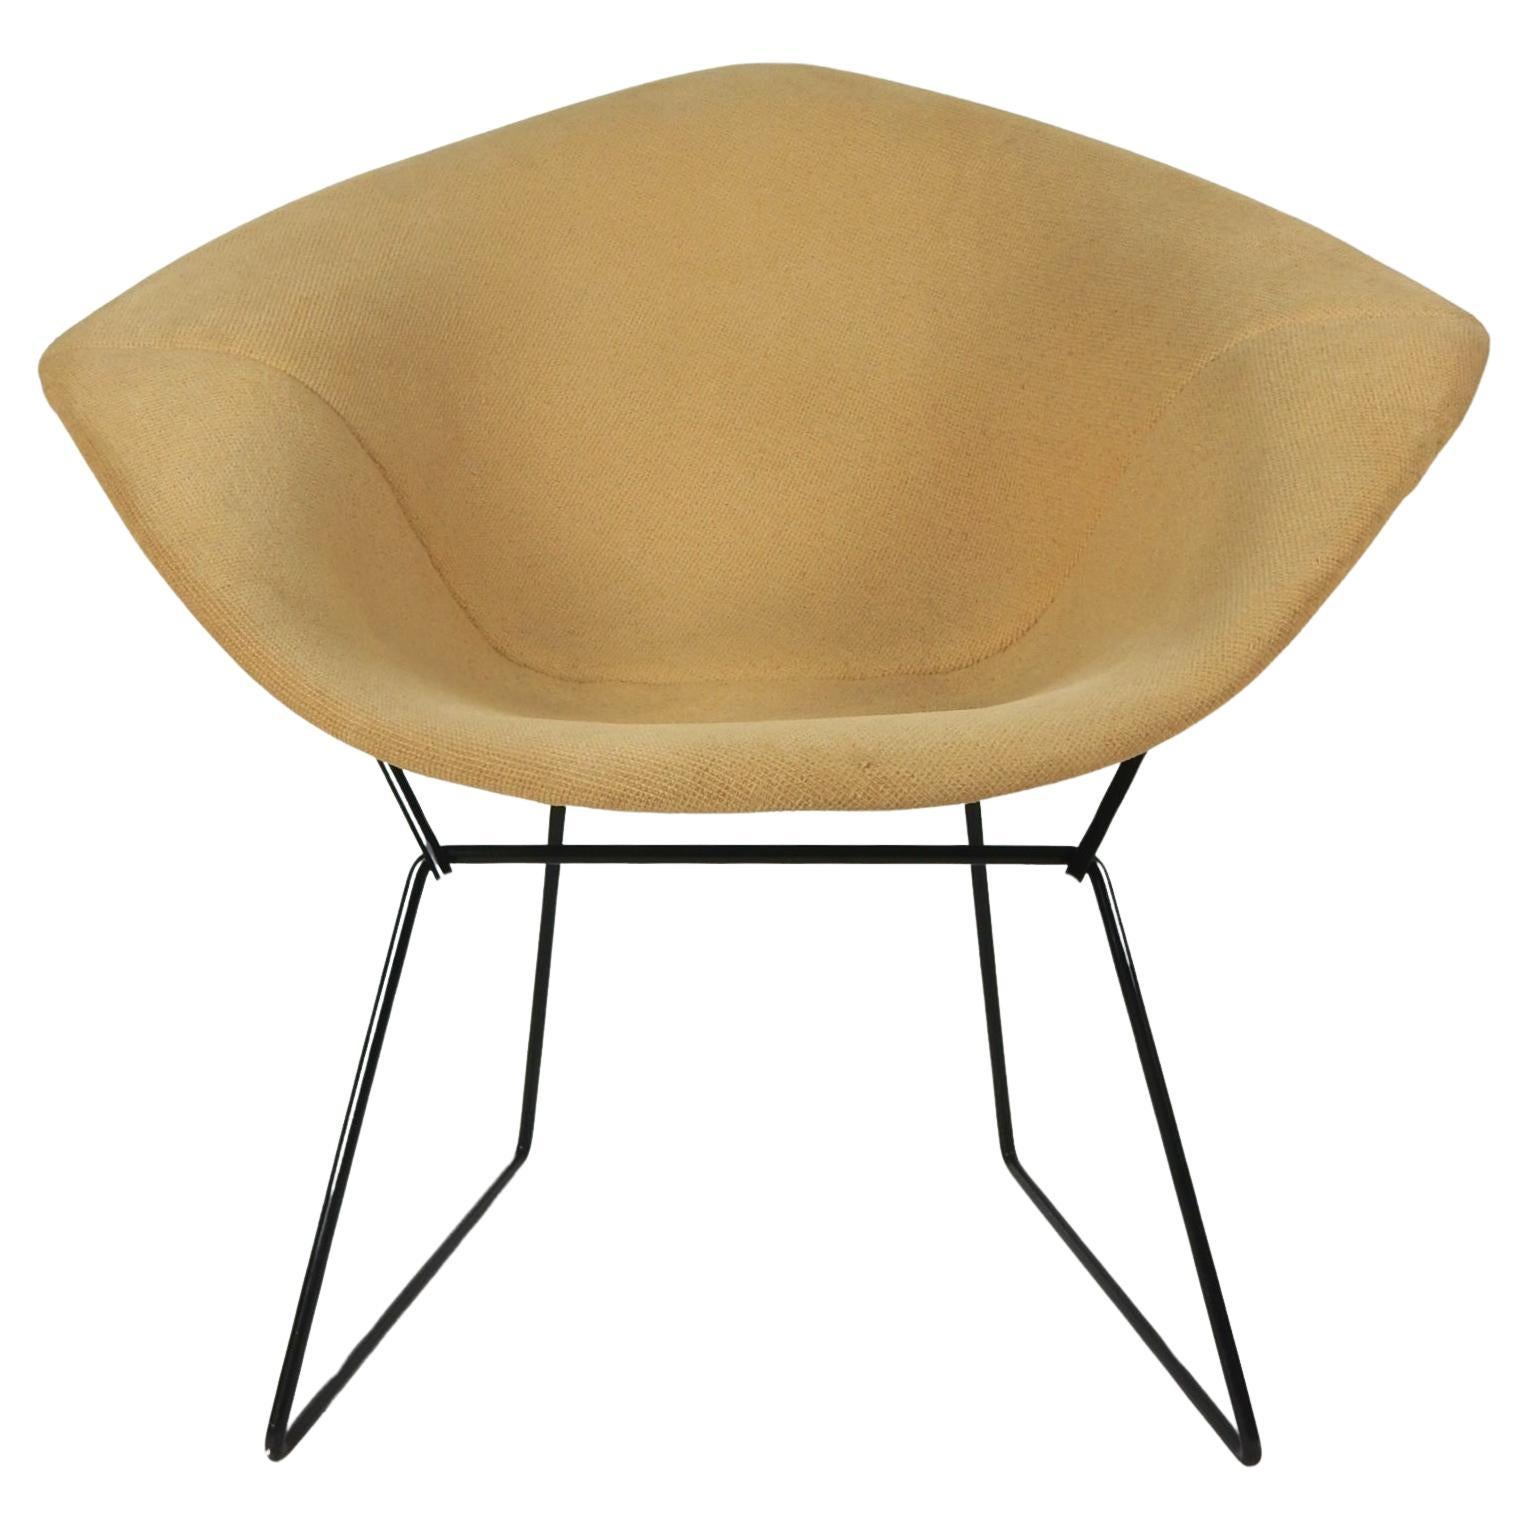 Original 1953 Harry Bertoia Diamond Chair for H. G. Knoll Products